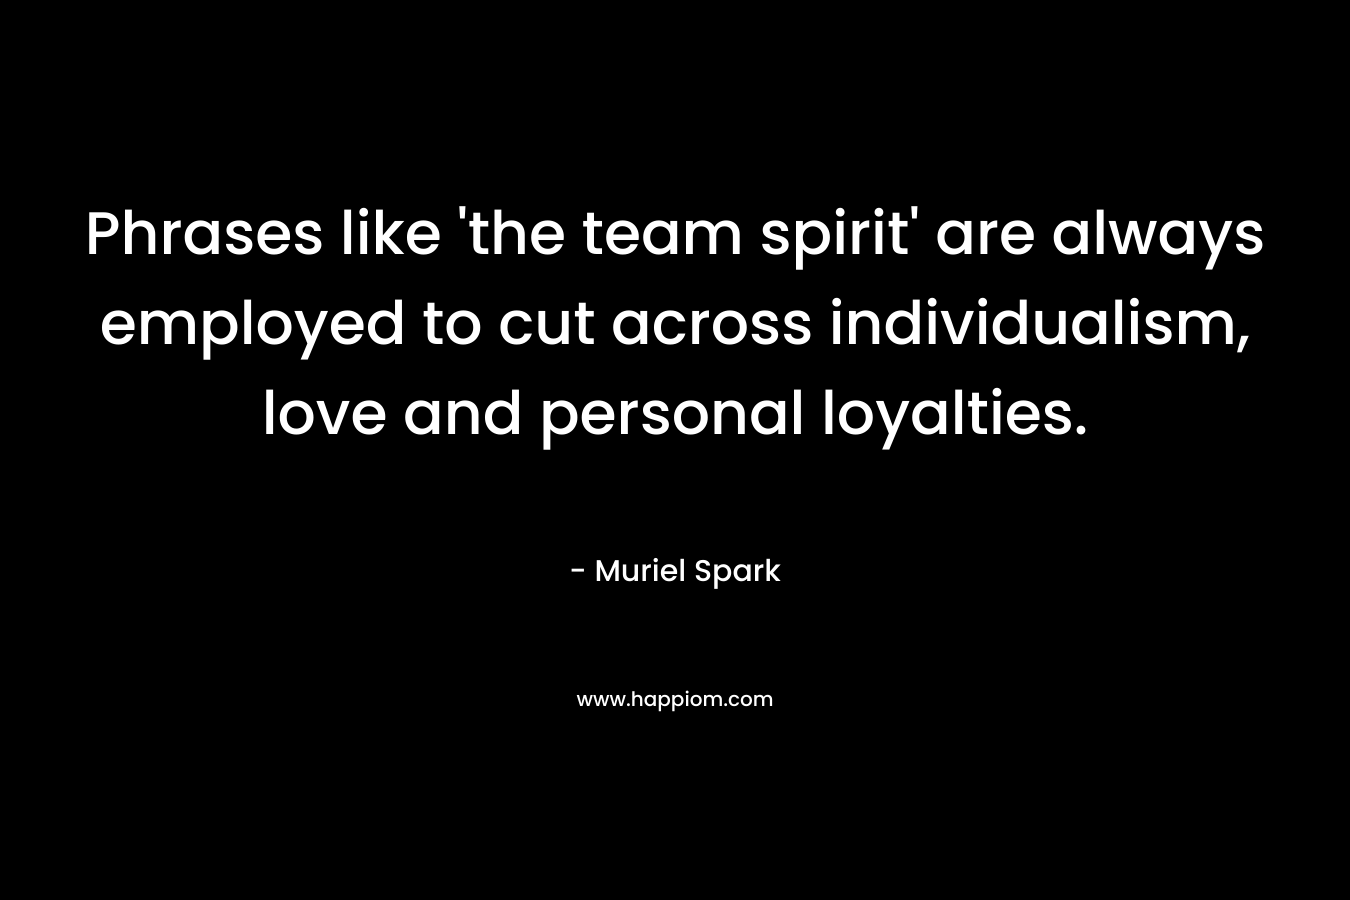 Phrases like 'the team spirit' are always employed to cut across individualism, love and personal loyalties.